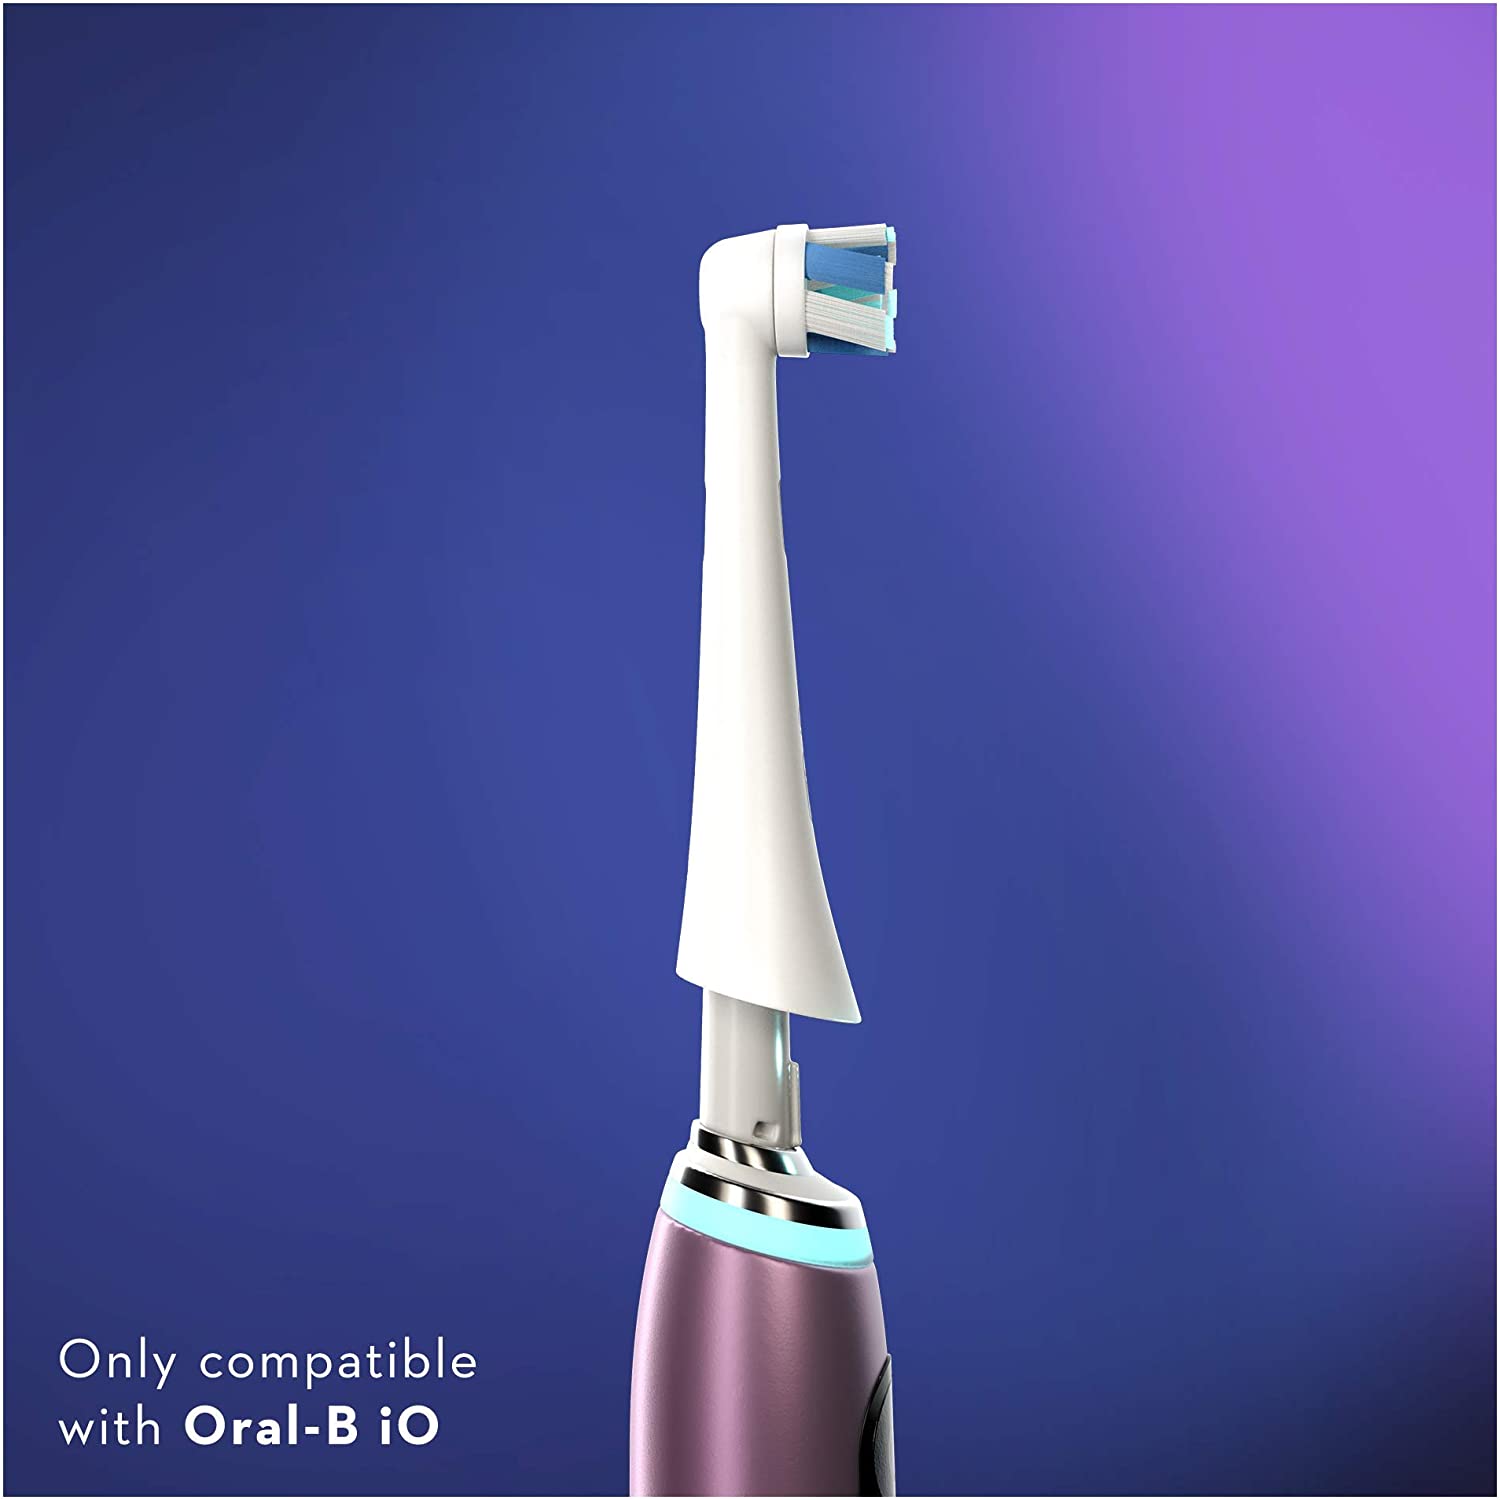 Oral-B iO 4pk Ultimate Clean Toothbrush Replacement Heads - White - Healthxpress.ie